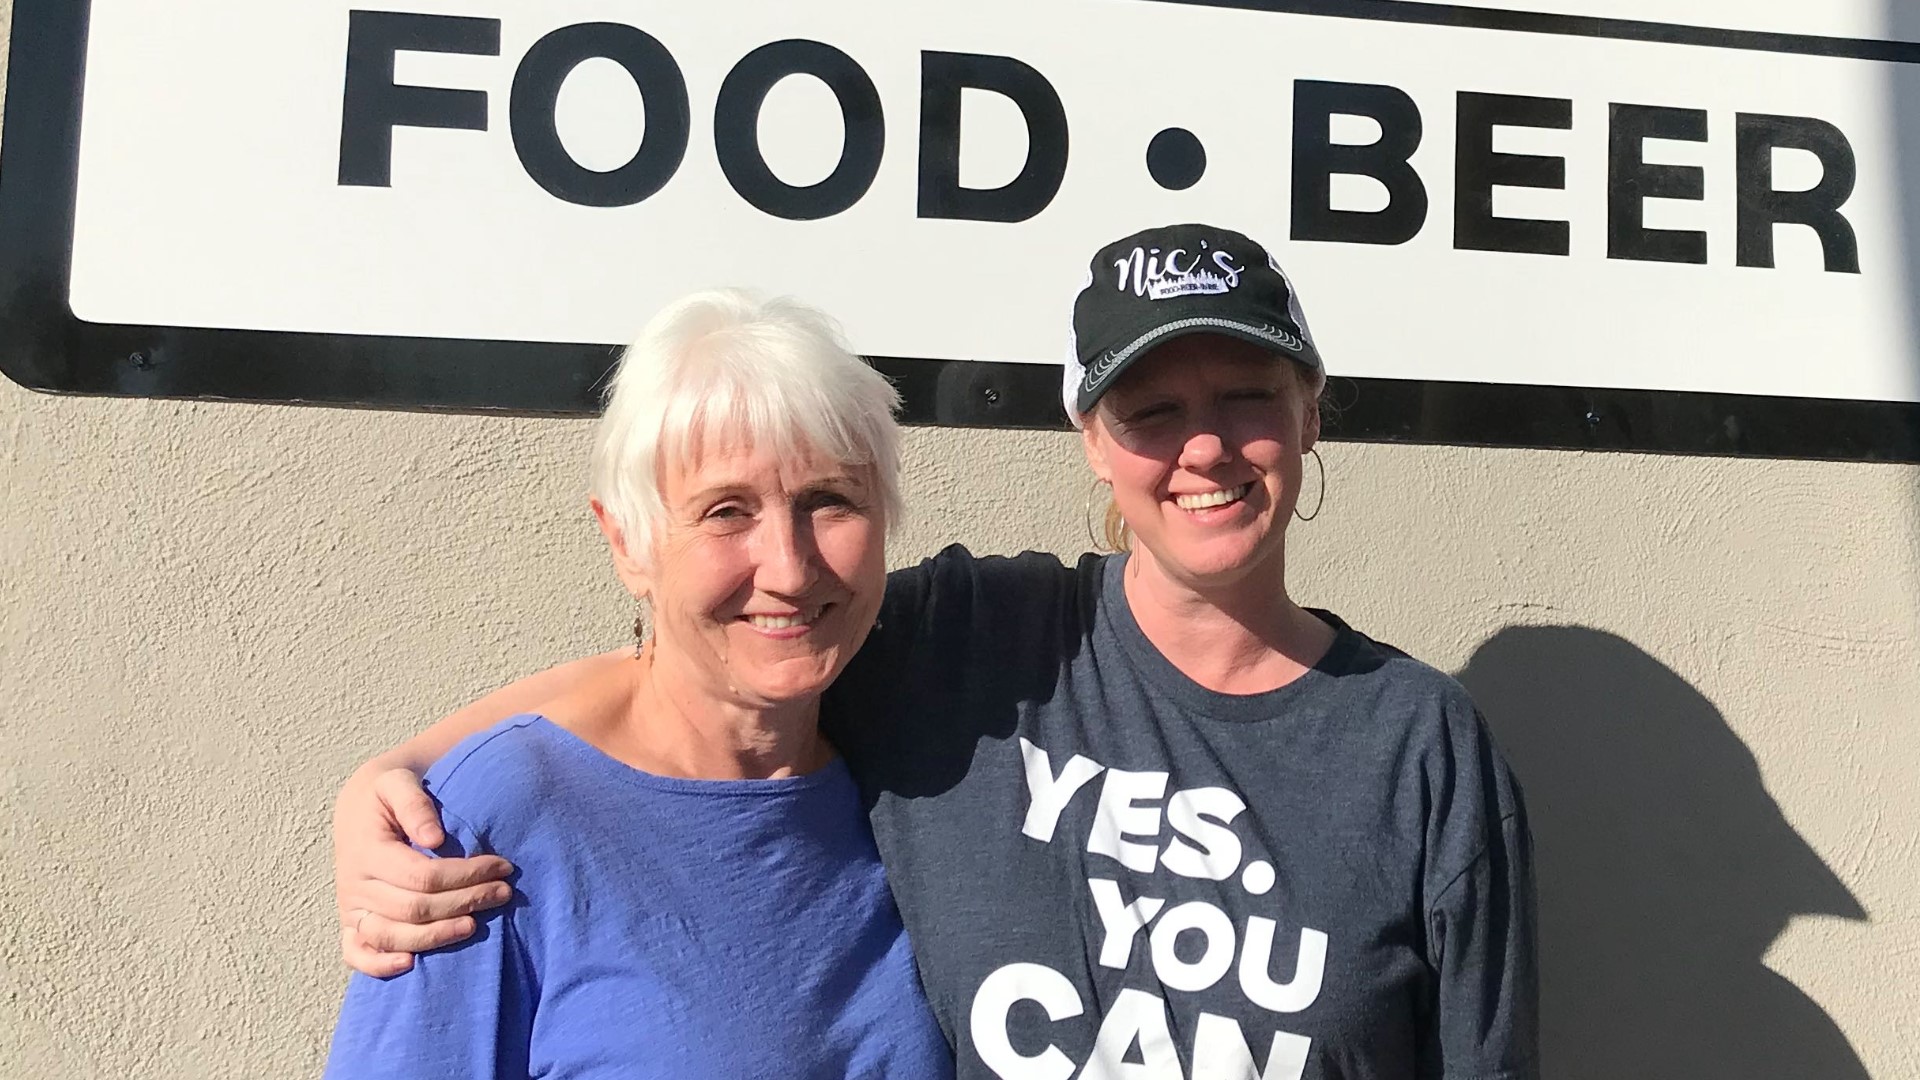 Nic's Food, Beer, and Wine is set to open at the corner of Skyway and Fir Streets in the heart of the downtown district in Paradise. The business is opening as Paradise continues to rebuild after the Camp Fire.